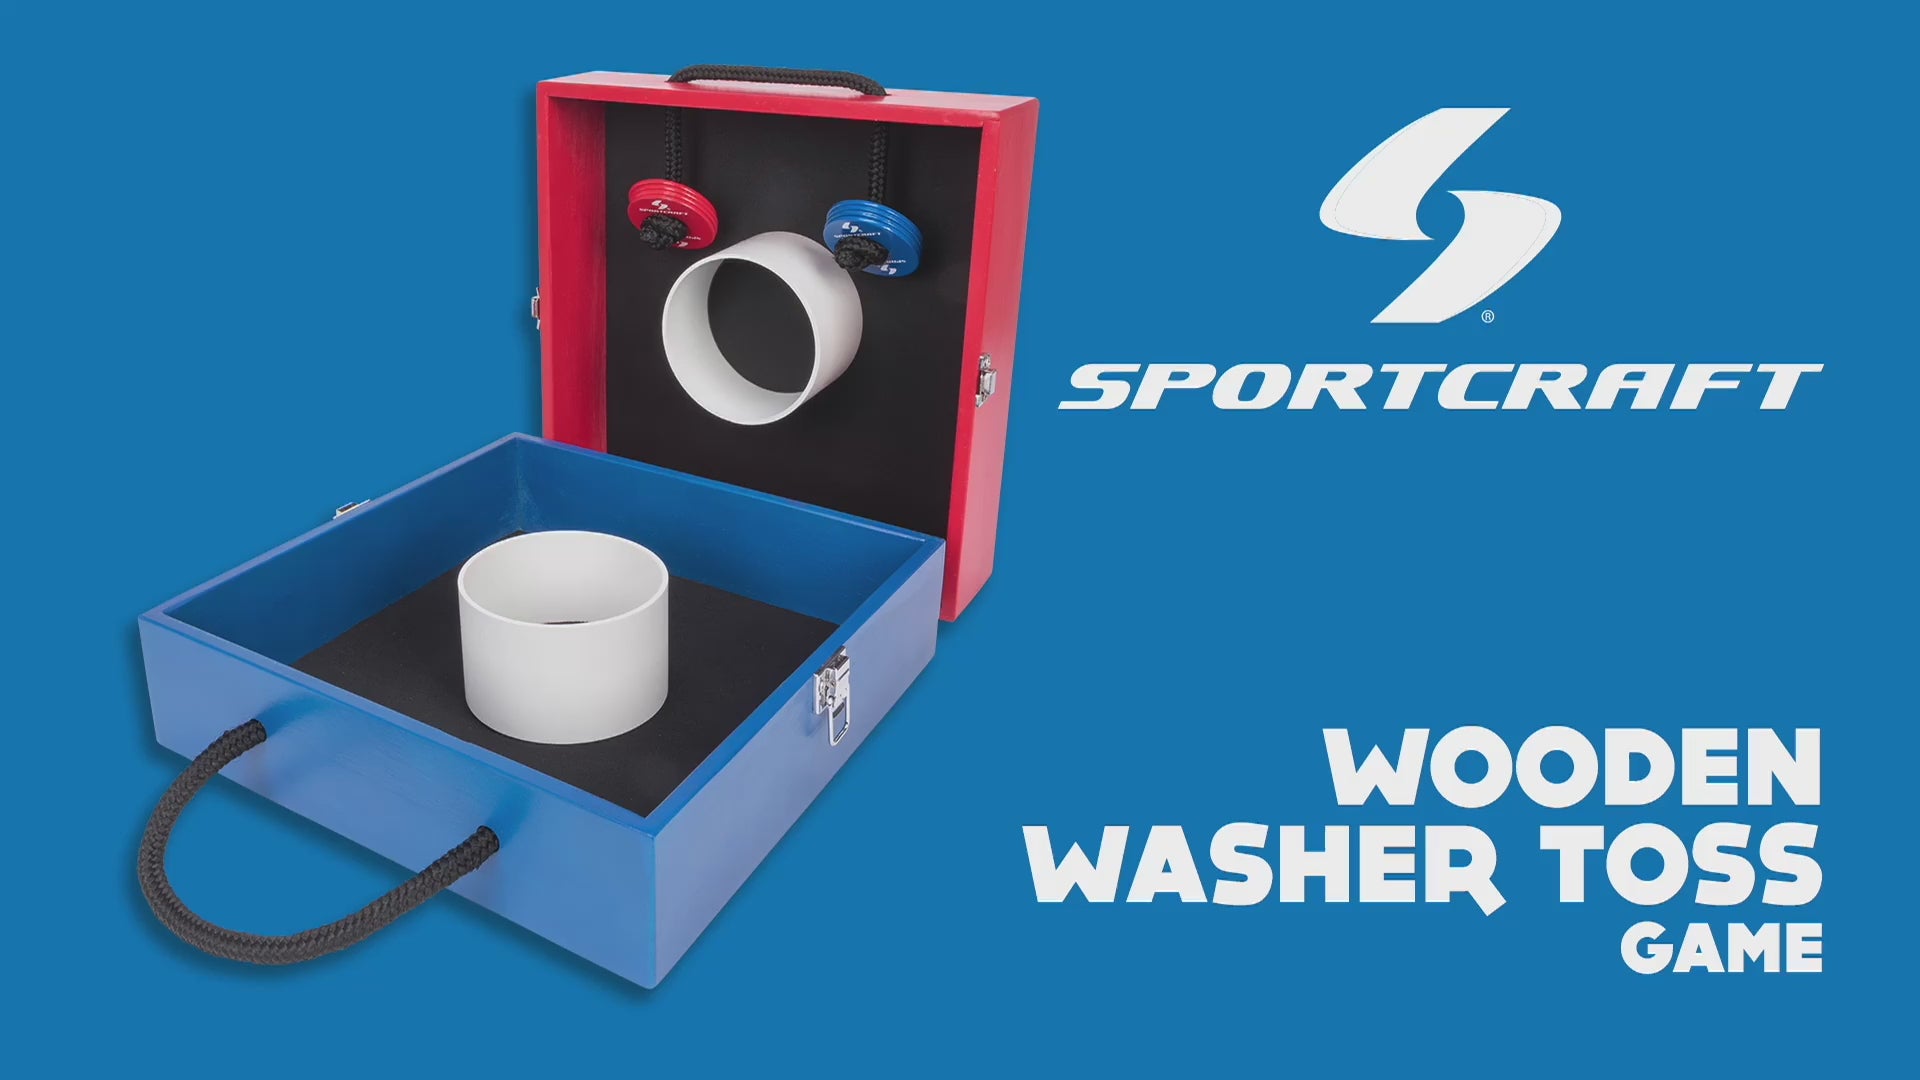 Sportcraft Wooden Washer Toss Game -  Video showing product